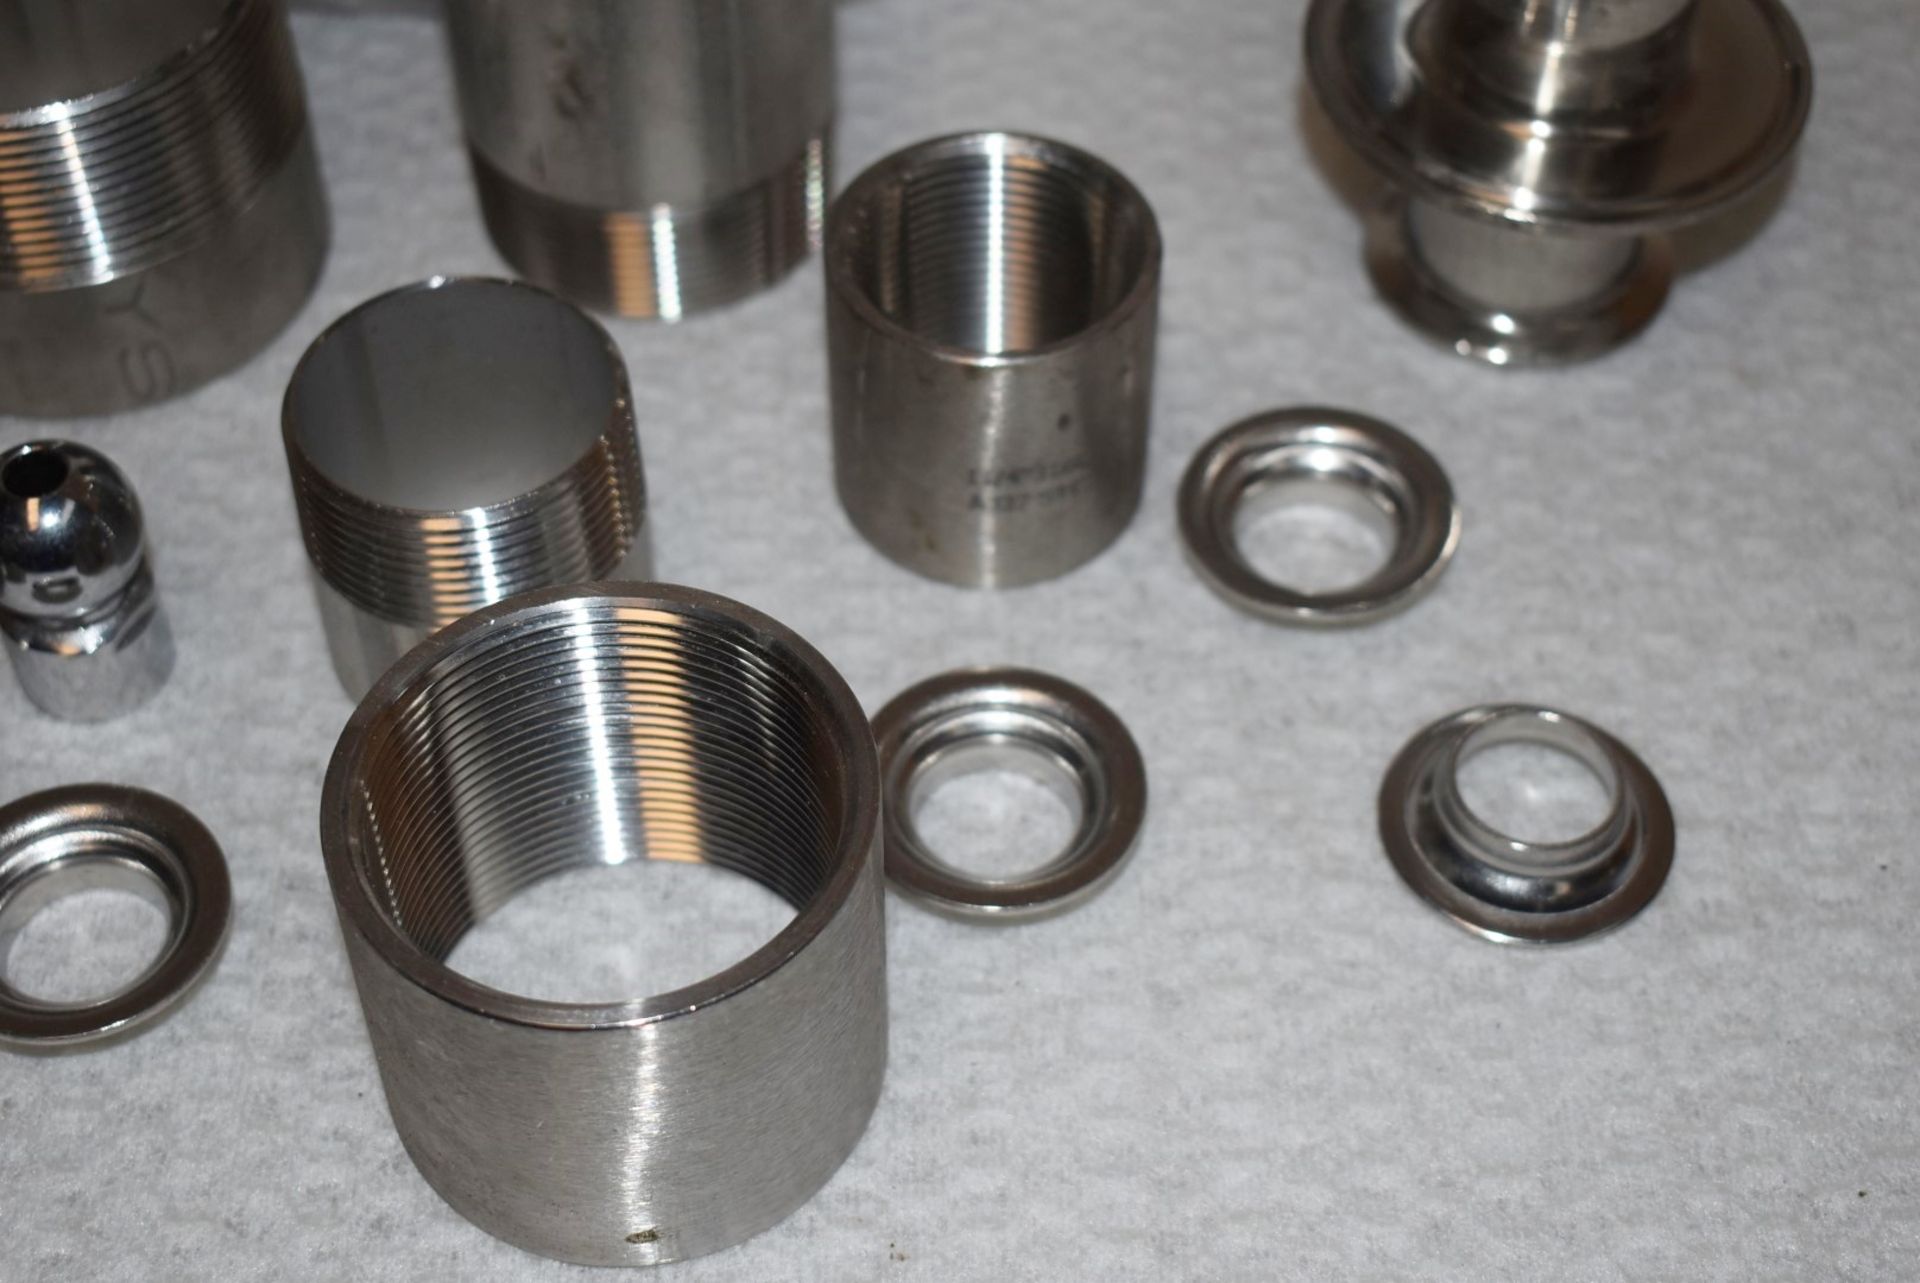 Assorted Job Lot of Stainless Steel Fittings For Brewery Equipment - Includes Approx 30 Pieces - - Image 5 of 10